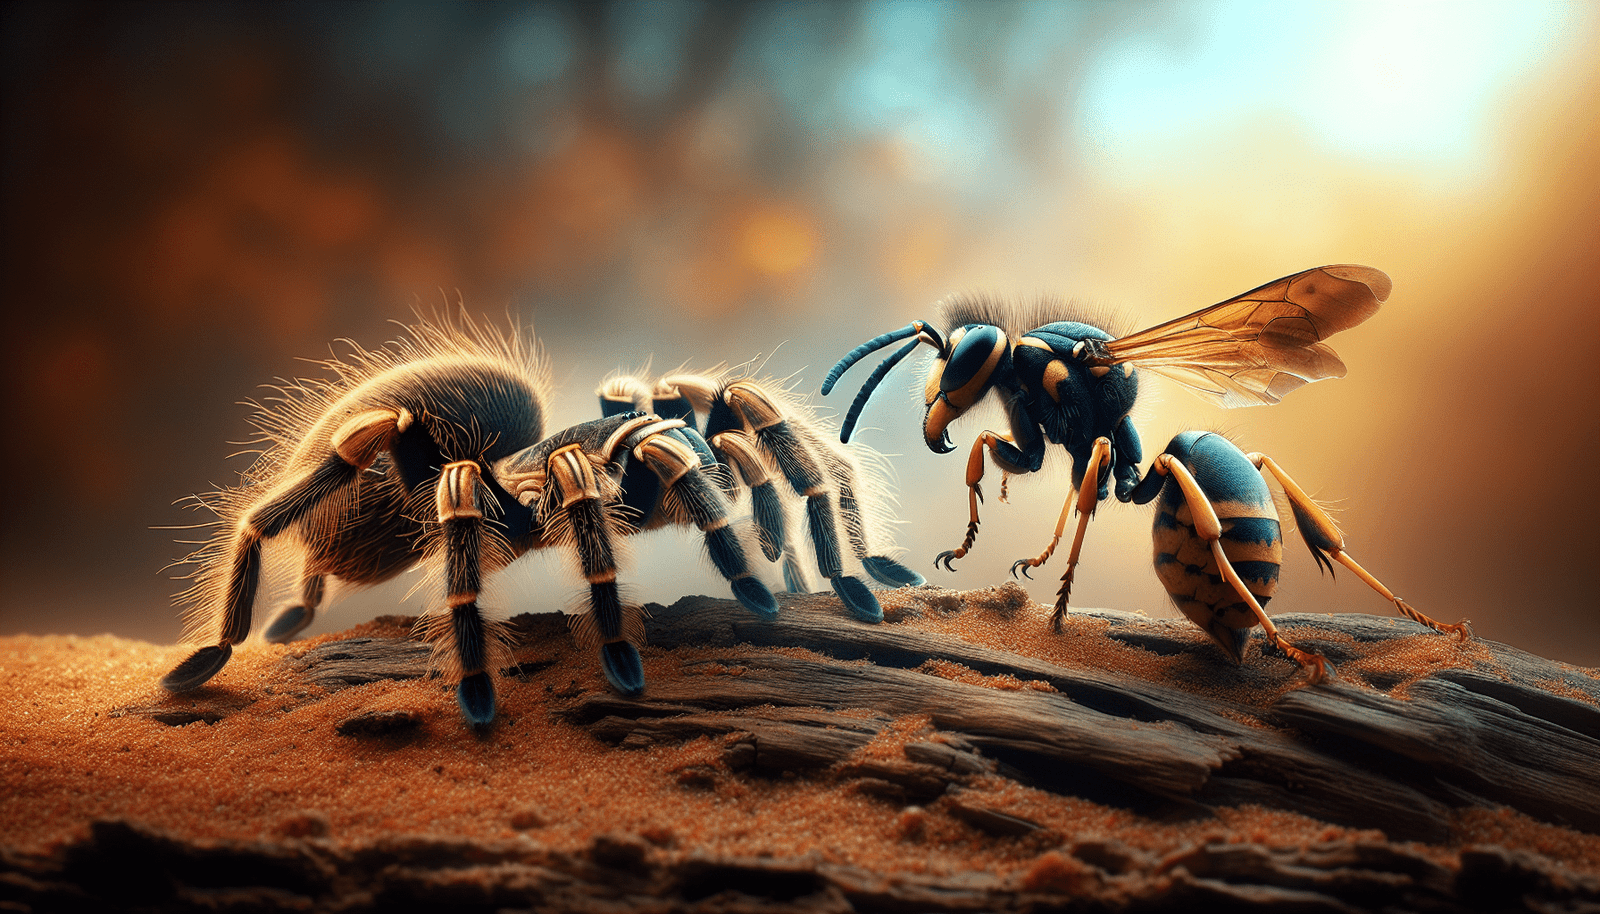 How Do Tarantulas Cope With Threats From Predatory Wasps During Foraging?